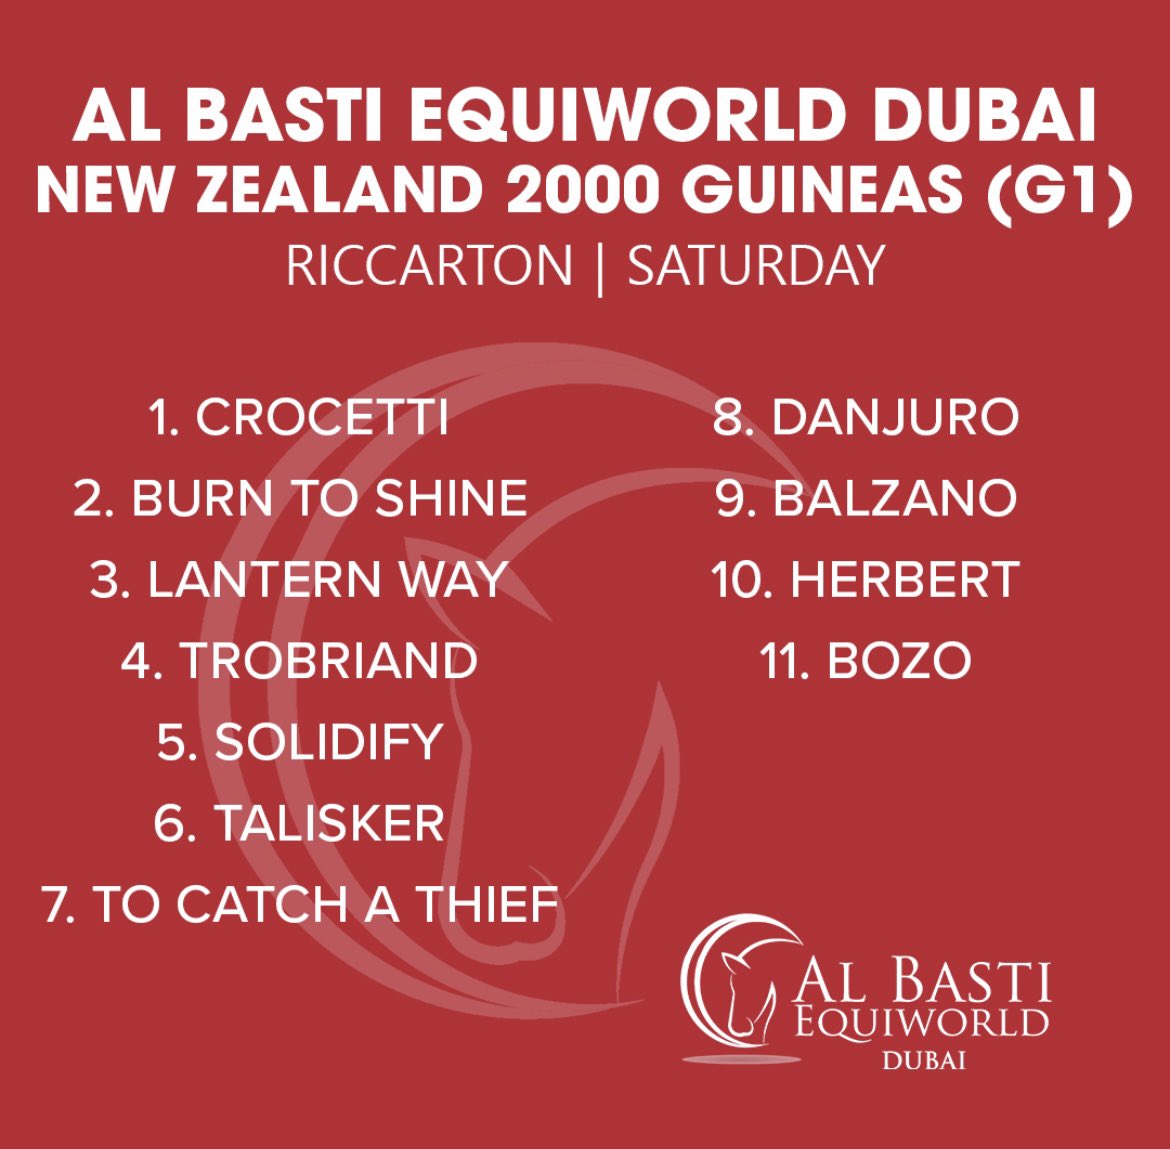 🇳🇿 We’re proud to be sponsoring the G1 Al Basti Equiworld Dubai New Zealand 2000 Guineas at Riccarton, Christchurch on Saturday. Best of luck to all those competing in this 3yo feature. #NZ2000Guineas #AlBastiEquiworldDubai